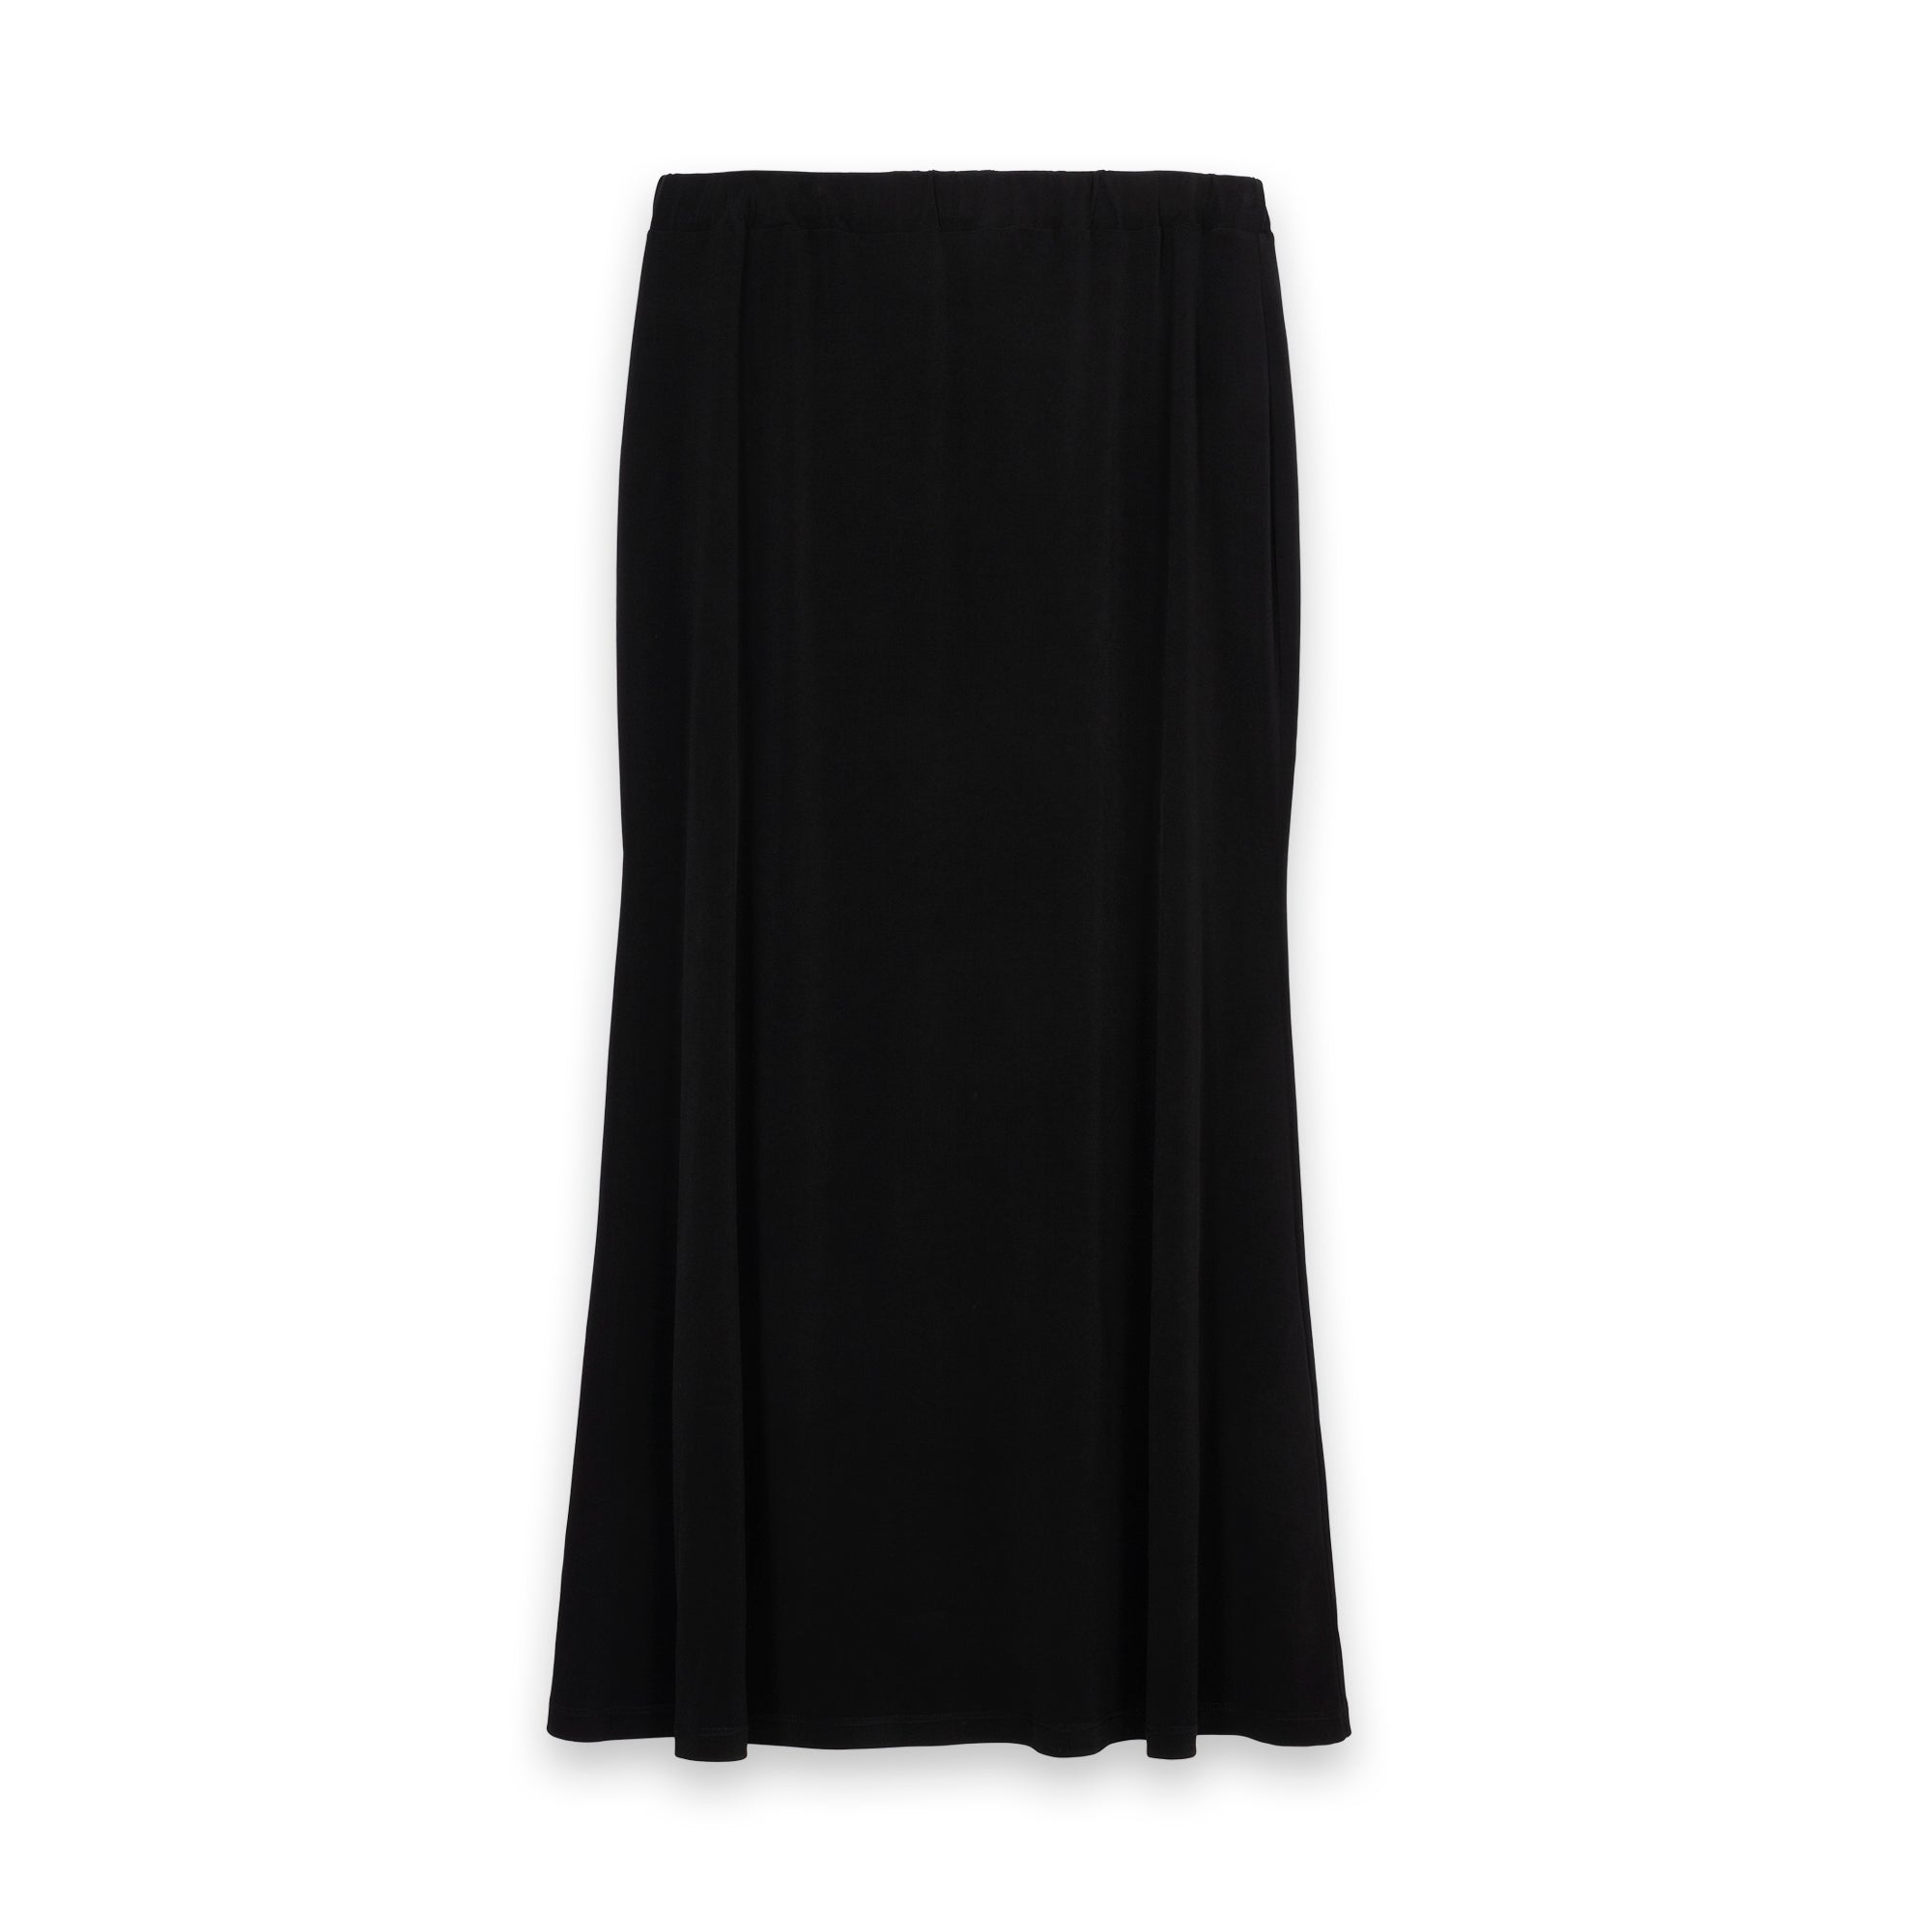 Essential Fit & Flare Skirt